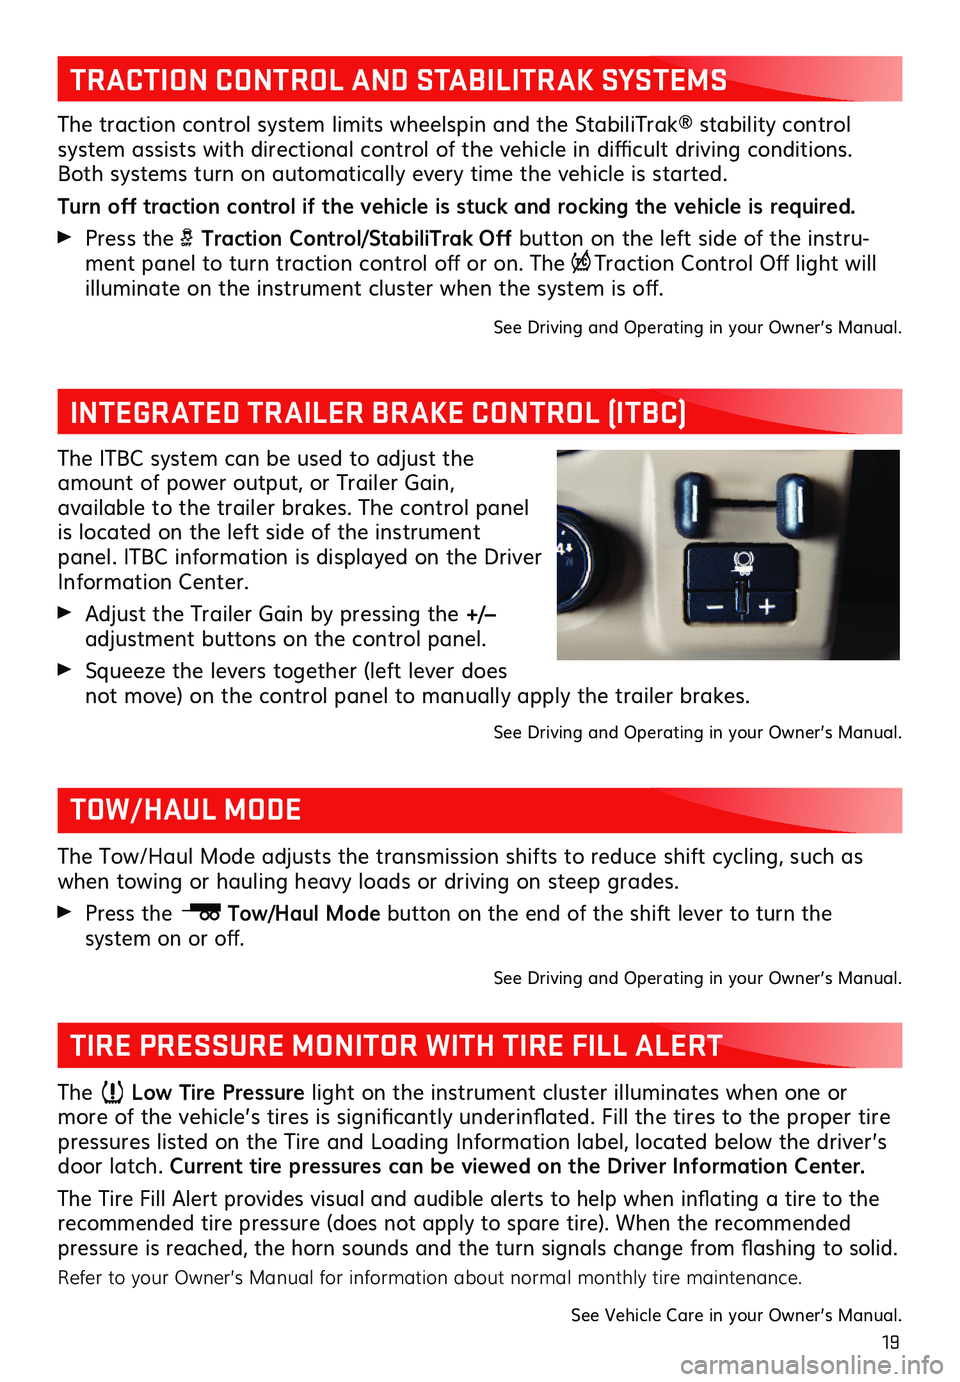 GMC YUKON XL 2019  Get To Know Guide 19
The ITBC system can be used to adjust the amount of power output, or Trailer Gain,  
available to the trailer brakes. The control panel is located on the left side of the instrument panel. ITBC inf